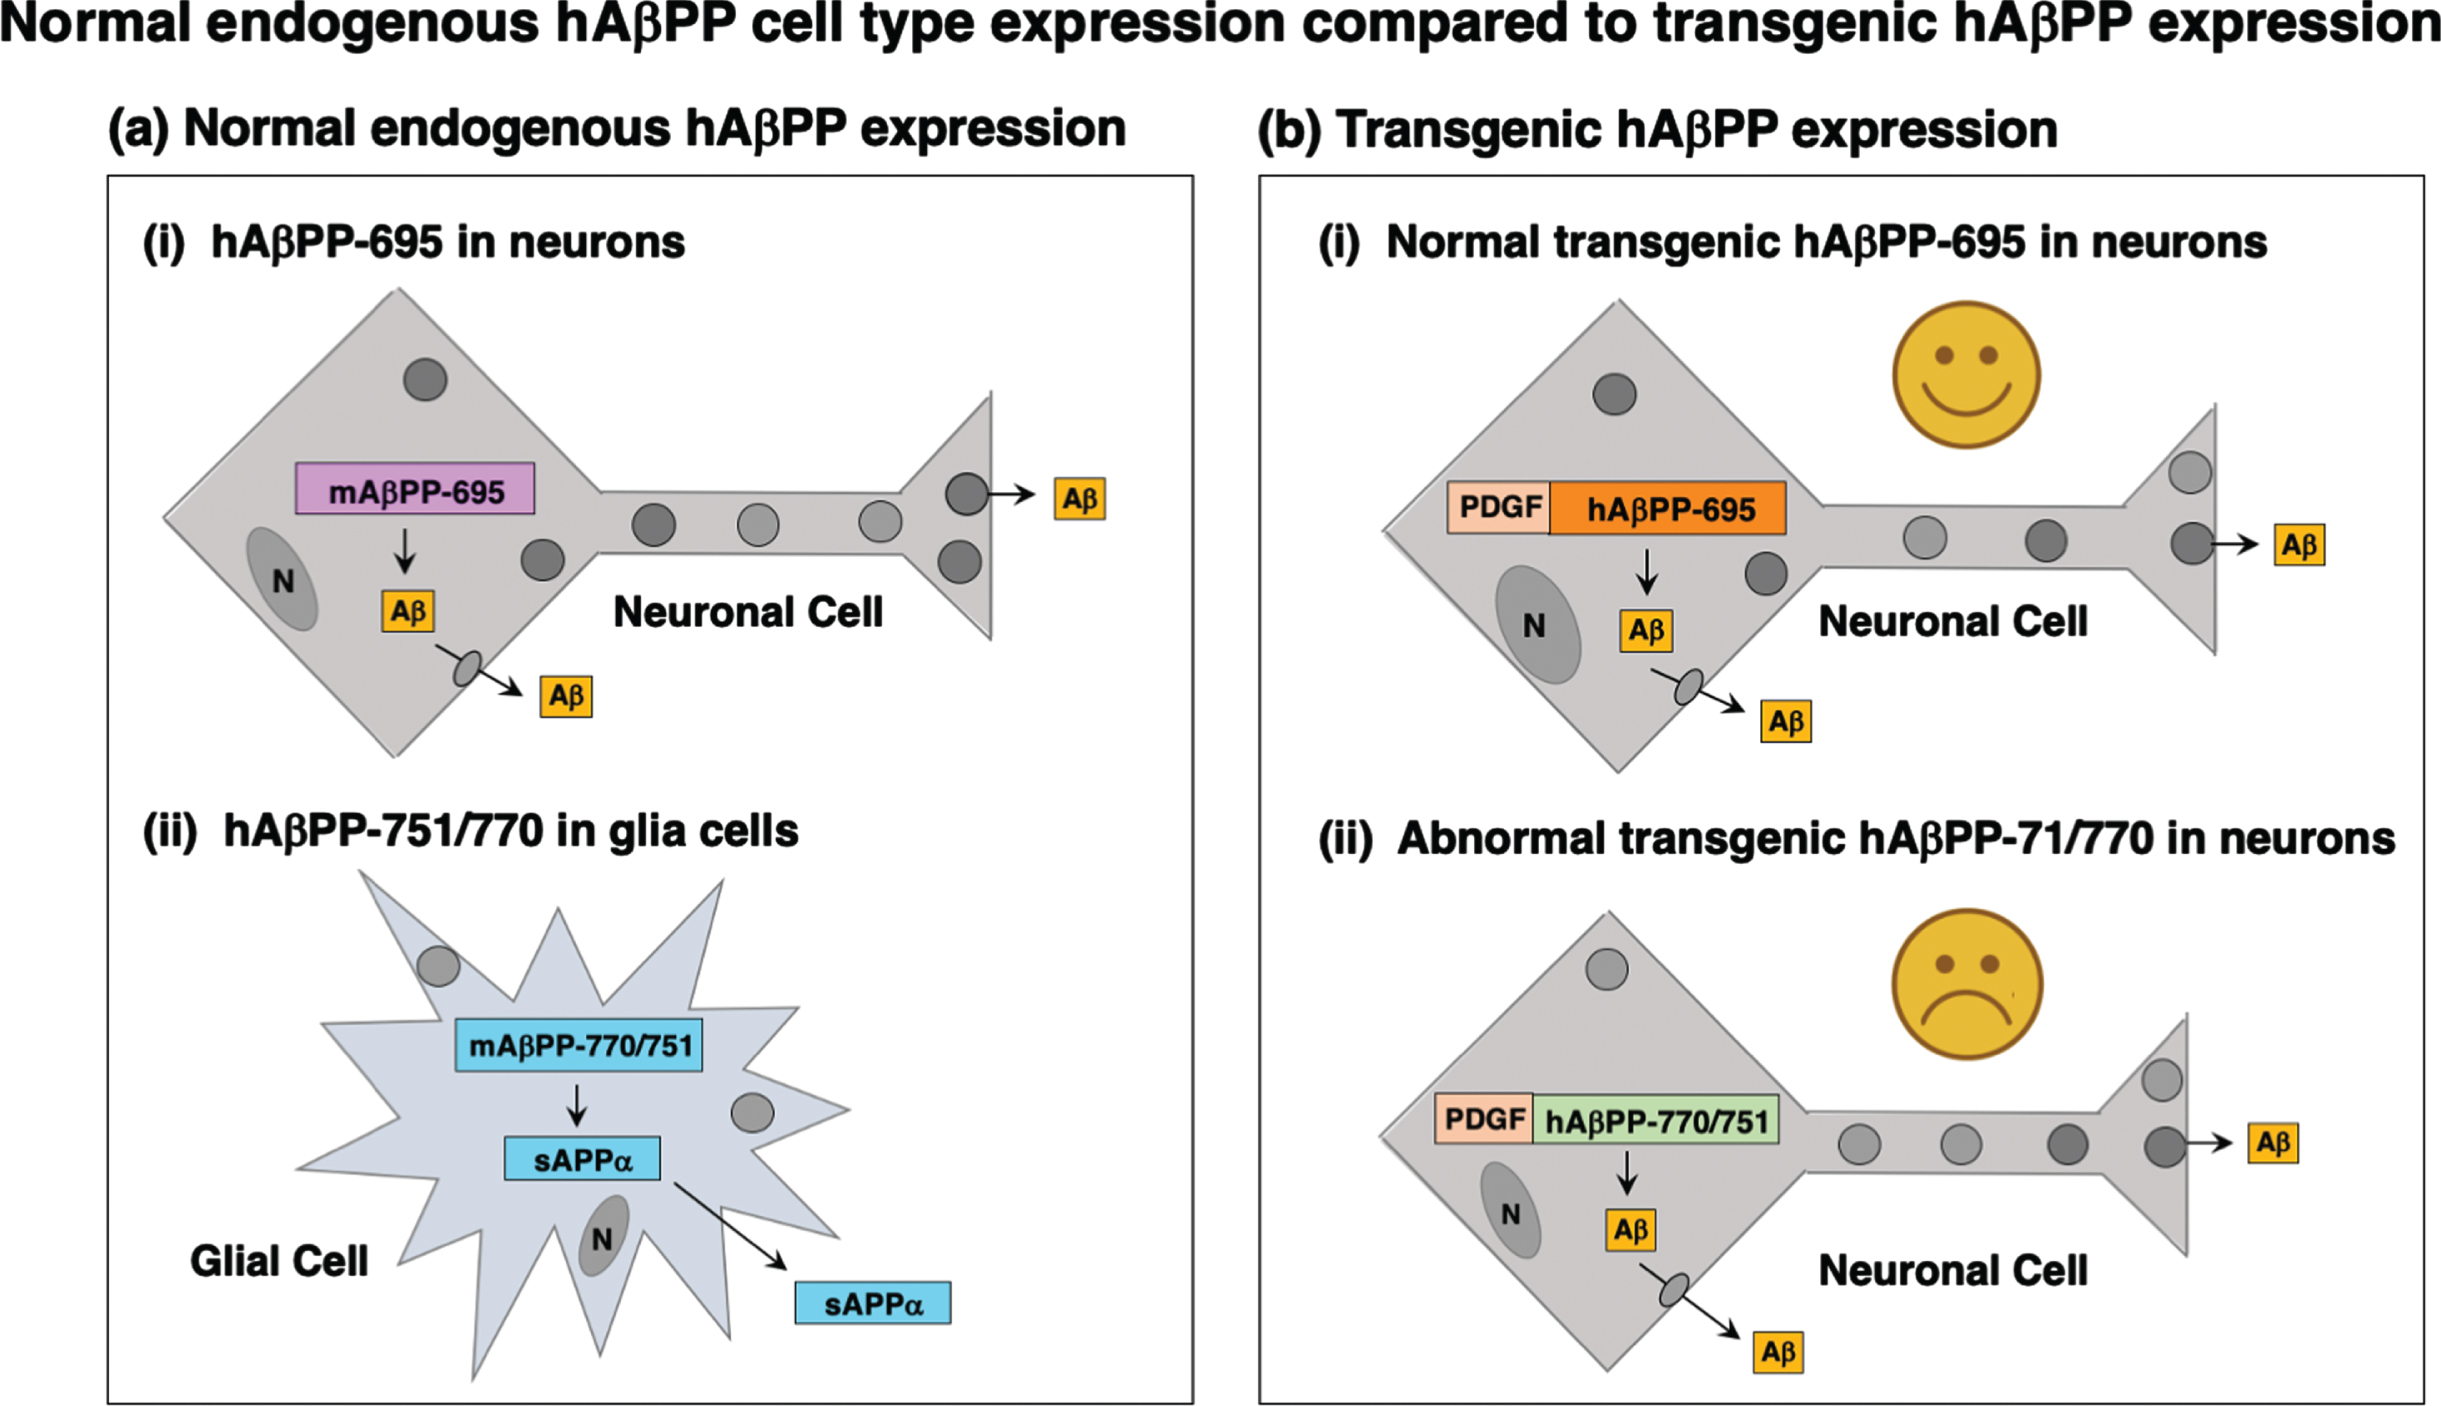 Normal hAβPP-695 expression in neurons and hAβPP-751/770 in glia cells, but abnormal hAβPP-751/770 transgene expression in neurons. (a) Normal endogenous expression of hAβPP isoforms. The hAβPP-695 isoform is exclusively expressed in neurons for Aβ production [22–24], and the hAβPP-751/770 isoforms are normally expressed in glia cells [27, 28]. (b) Transgenic expression of hAβPP-695 in its normal neuronal cell type, but abnormal expression of hAβPP-751/770 in neurons. Expression of the hAβPP-695 under the control of the PDGF promoter results in expression in neurons, the normal cell type for this isoform as conducted by the Hook group [7, 10, 15]. But PDGF driven expression of hAβPP-751/770 results in abnormal expression in neurons [16, 17, 23], rather than in the normal location of glia cells [27, 28].